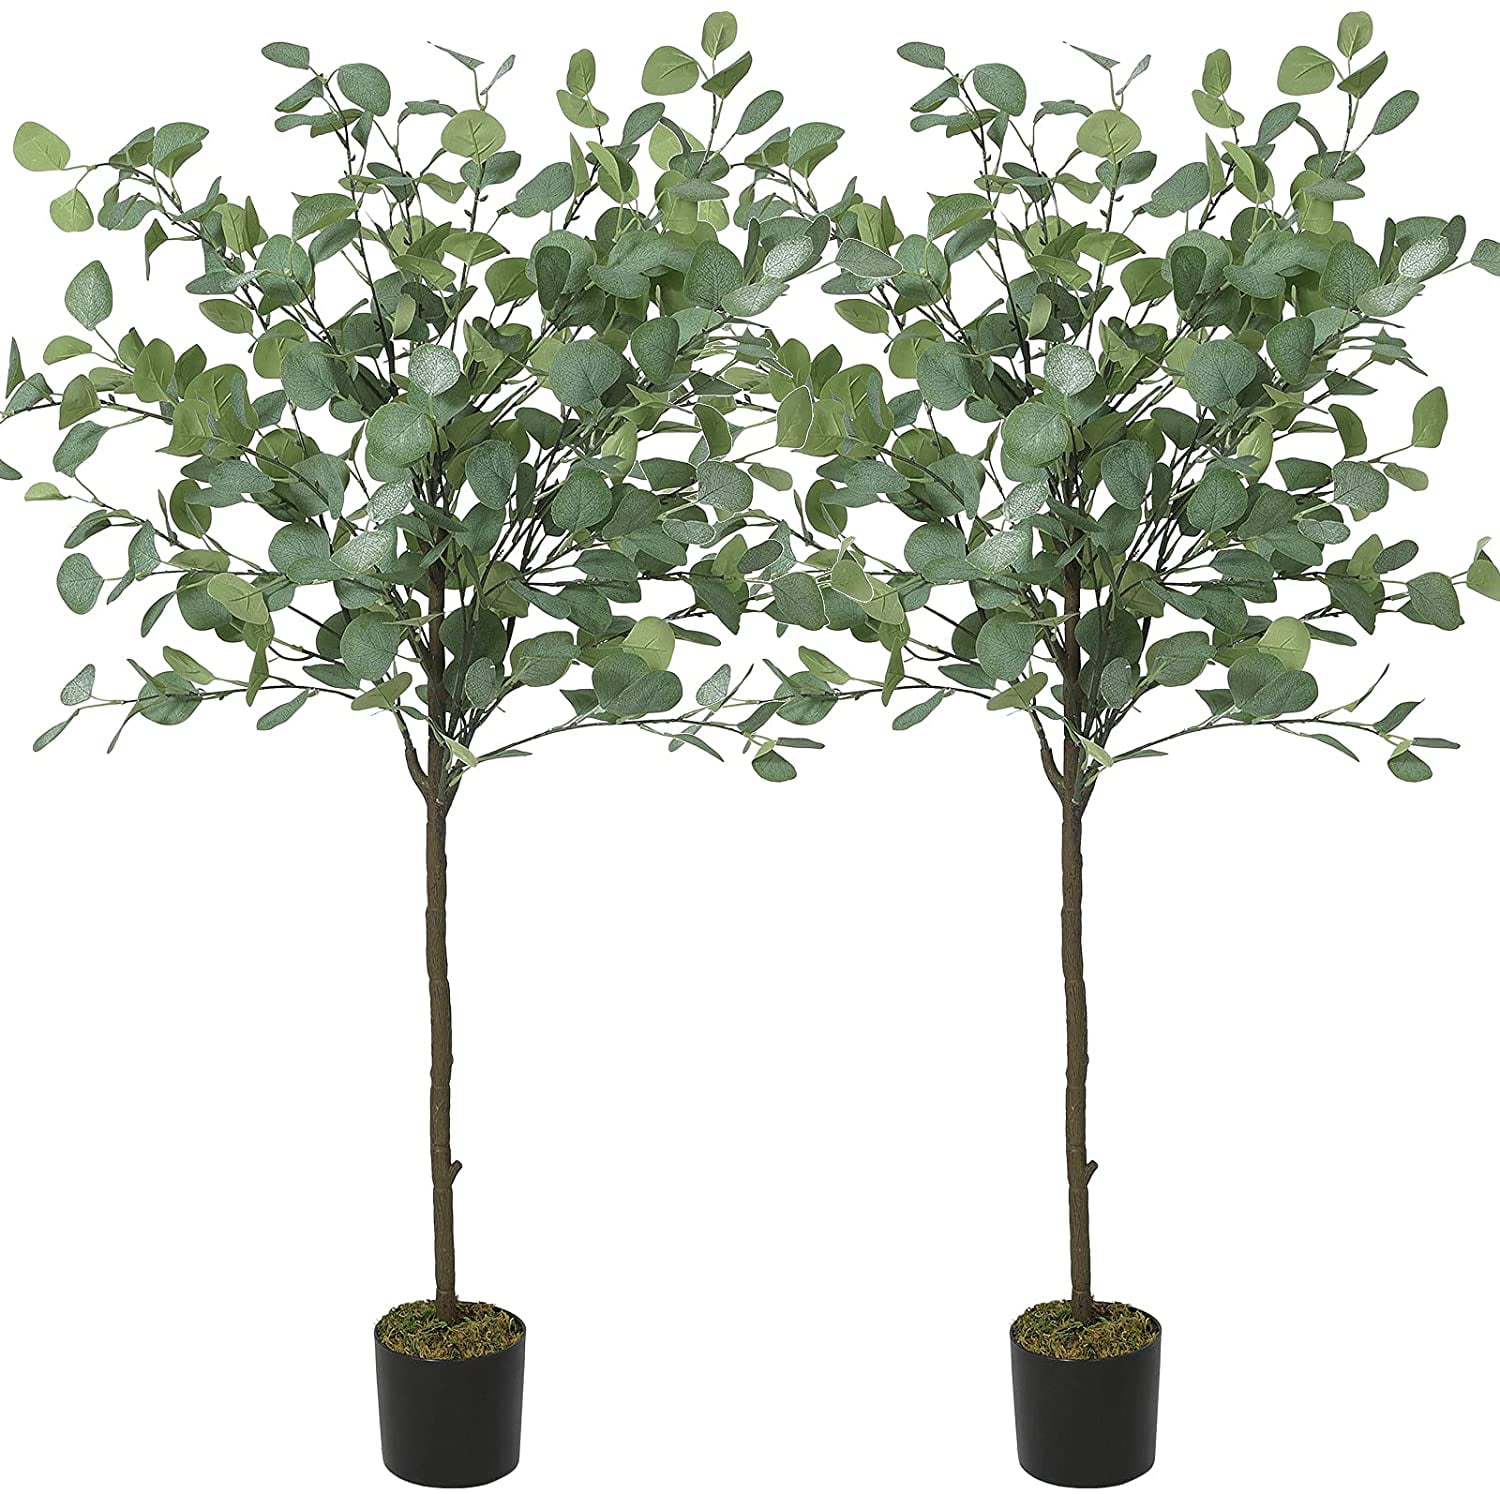 VIAGDO Artificial Eucalyptus Tree 4ft Tall 276 Silver Dollar Leaves Plants Fake Eucalyptus Stems Silk Plants for Living Room Decoration Modern Artificial Tree Home Party Wedding Decor Indoor 2 Pack